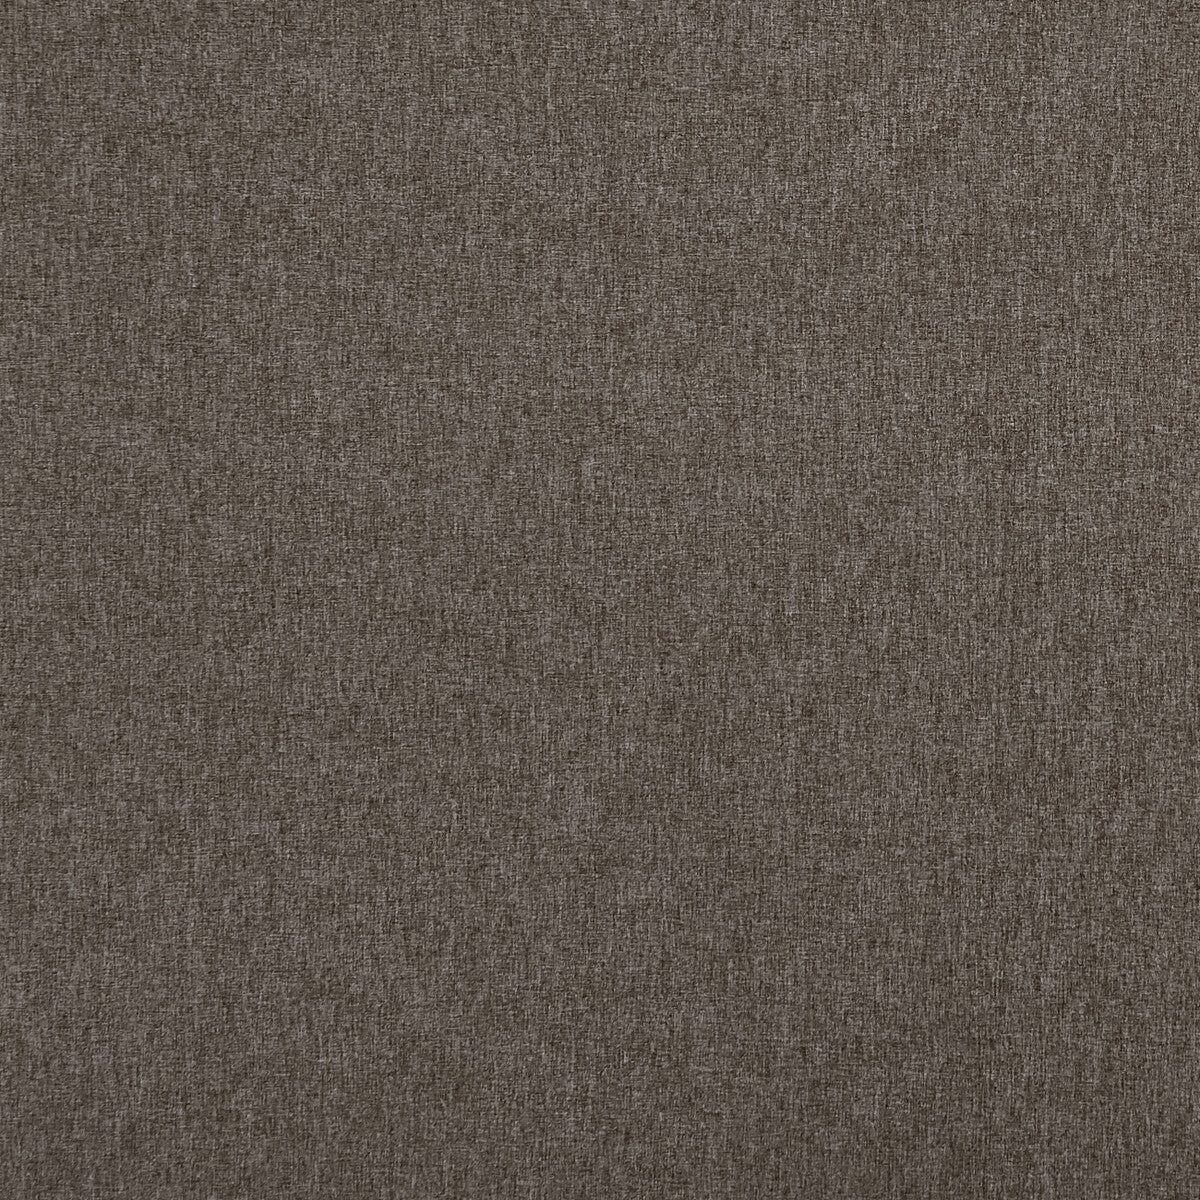 Highlander fabric in espresso color - pattern F0848/44.CAC.0 - by Clarke And Clarke in the Clarke &amp; Clarke Highlander 2 collection